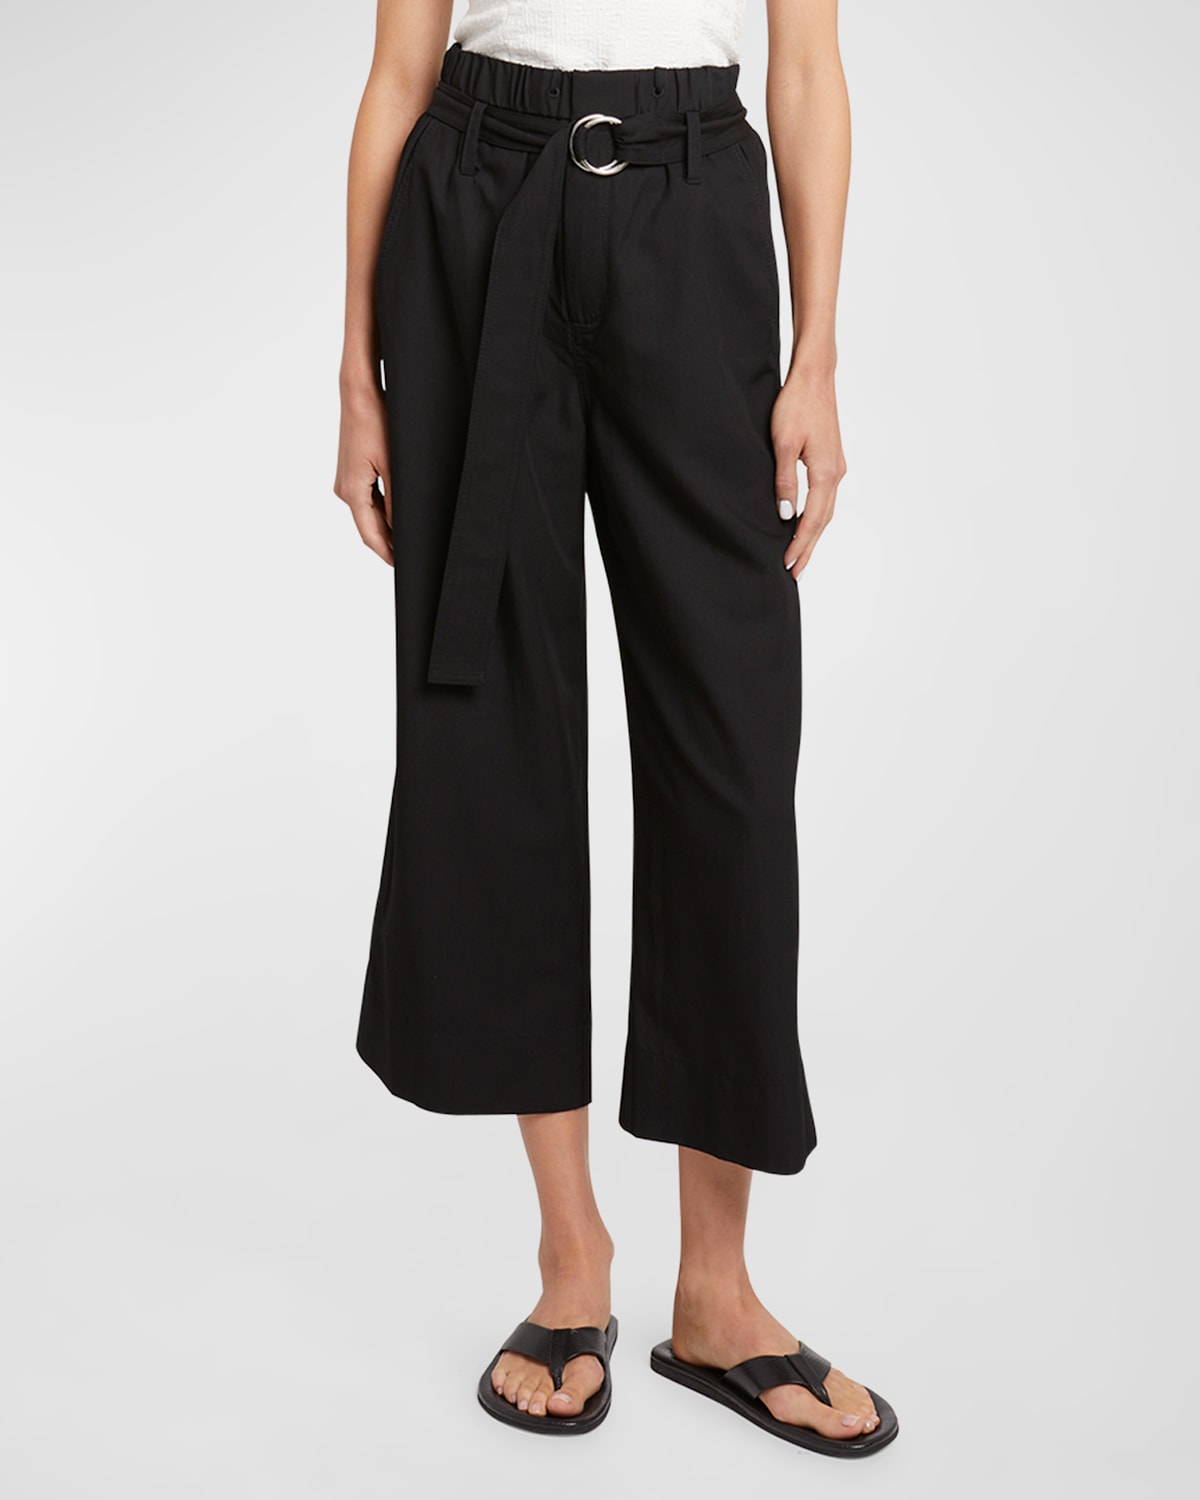 Proenza Schouler White Label Brooke Drapey Belted Suiting Pants In Black